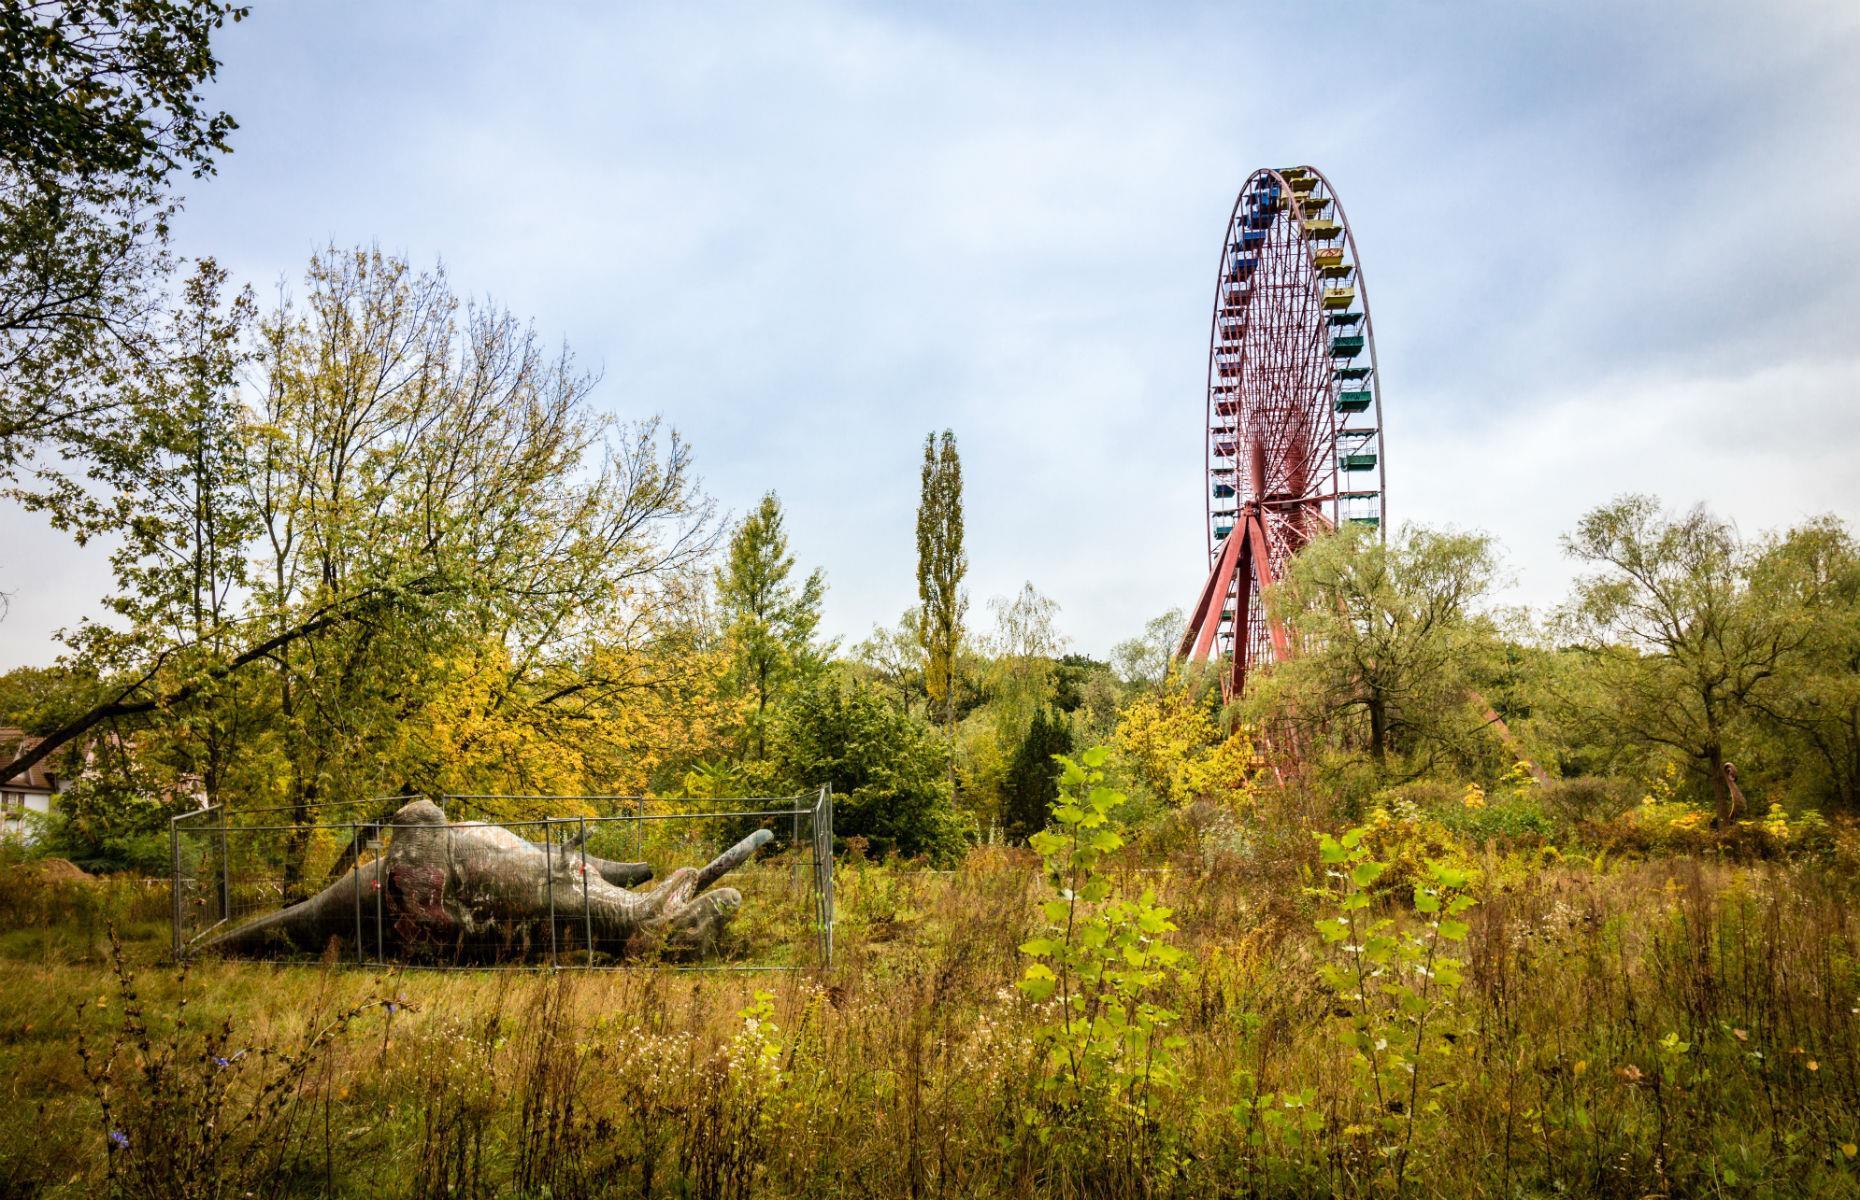 <p>Wherever in the world they're left to ruin, there's something especially haunting about an abandoned theme park. The bones of Berlin's Spreepark – popular back in the Sixties and Seventies – are choked by greenery today and a wander between these rusting rides is bound to give you goosebumps. Not least because they're apparently host to some lingering spirits. <a href="https://www.visitberlin.de/en/event/guided-tours-through-spreepark">Guided tours</a> offer visitors the chance to seek them out for themselves.</p>  <p><strong><a href="https://www.loveexploring.com/galleries/77151/inside-americas-abandoned-theme-parks">These are America's abandoned theme parks</a></strong></p>